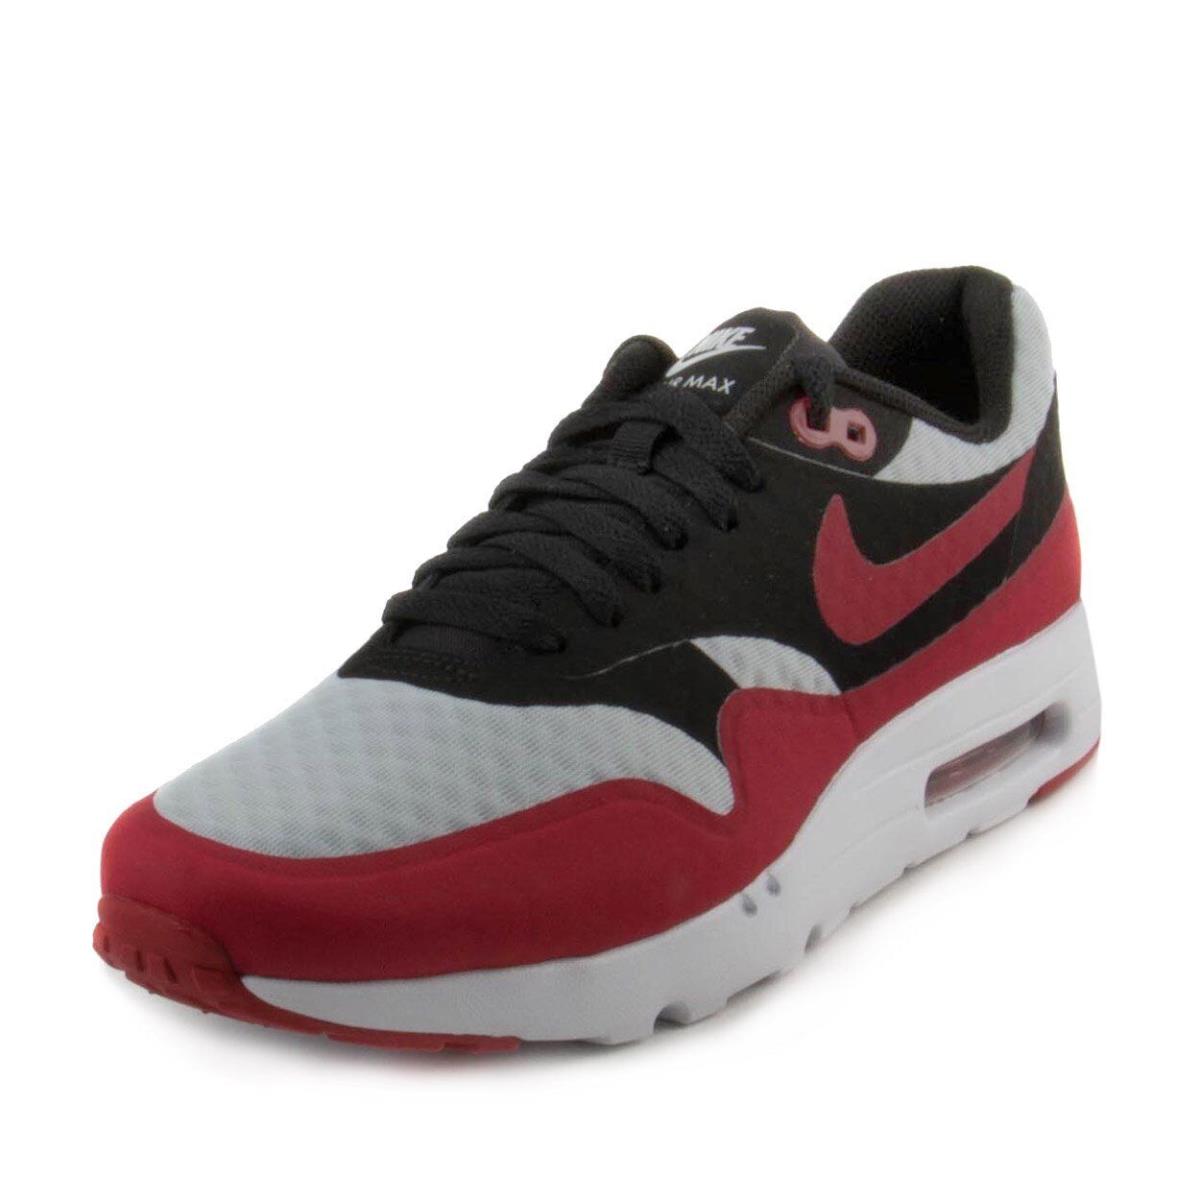 Men s Nike Air Max 1 Ultra Essential Bred Shoe Size 9.5